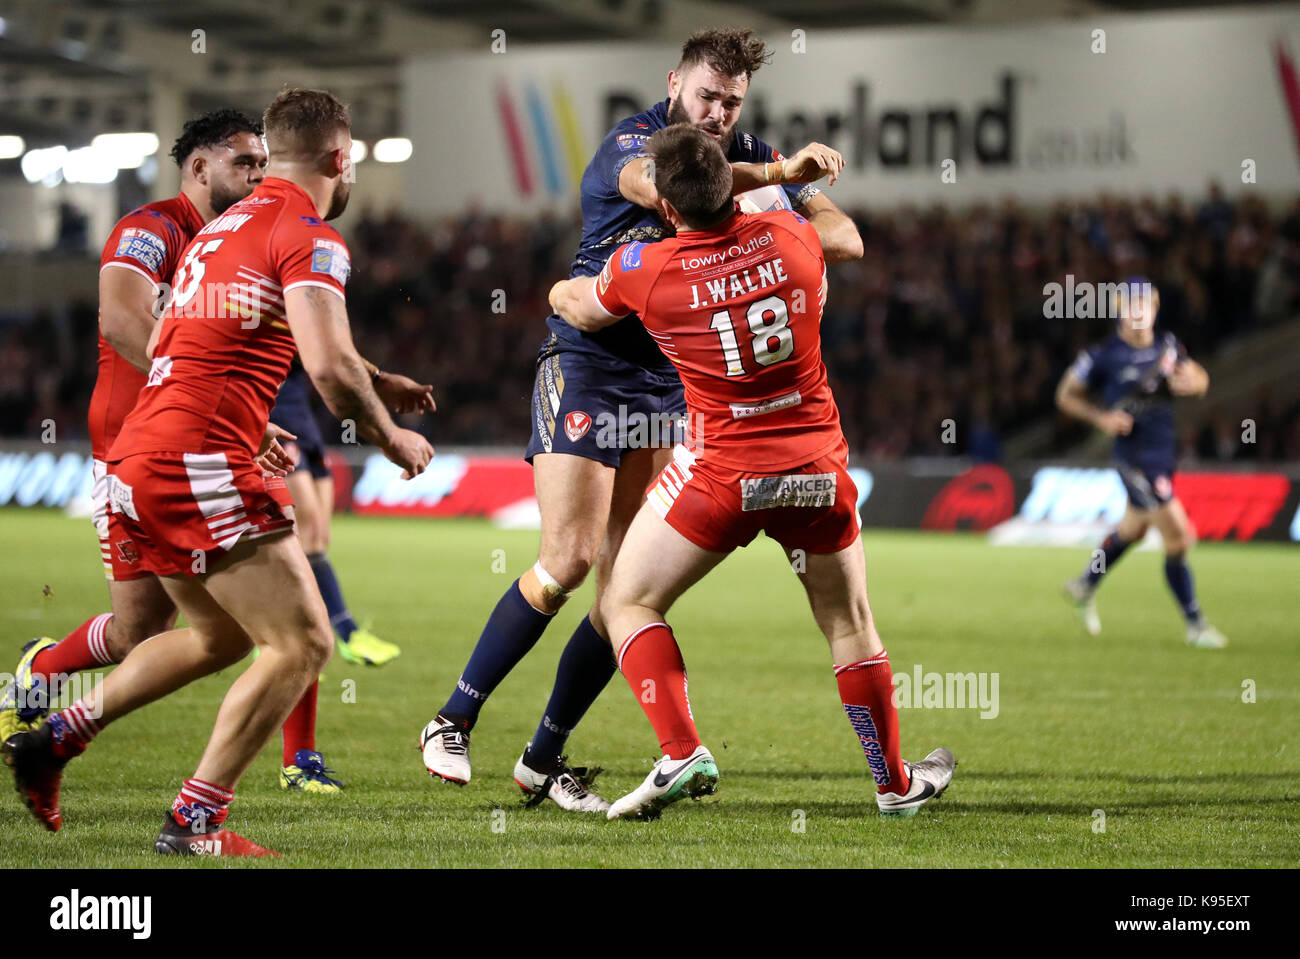 St Helens Alex Walmsley drives to the line past Salford Red Devils' Mason Caton-Brown for a try, during the Betfred Super 8s match at the AJ Bell Stadium, Salford. Stock Photo